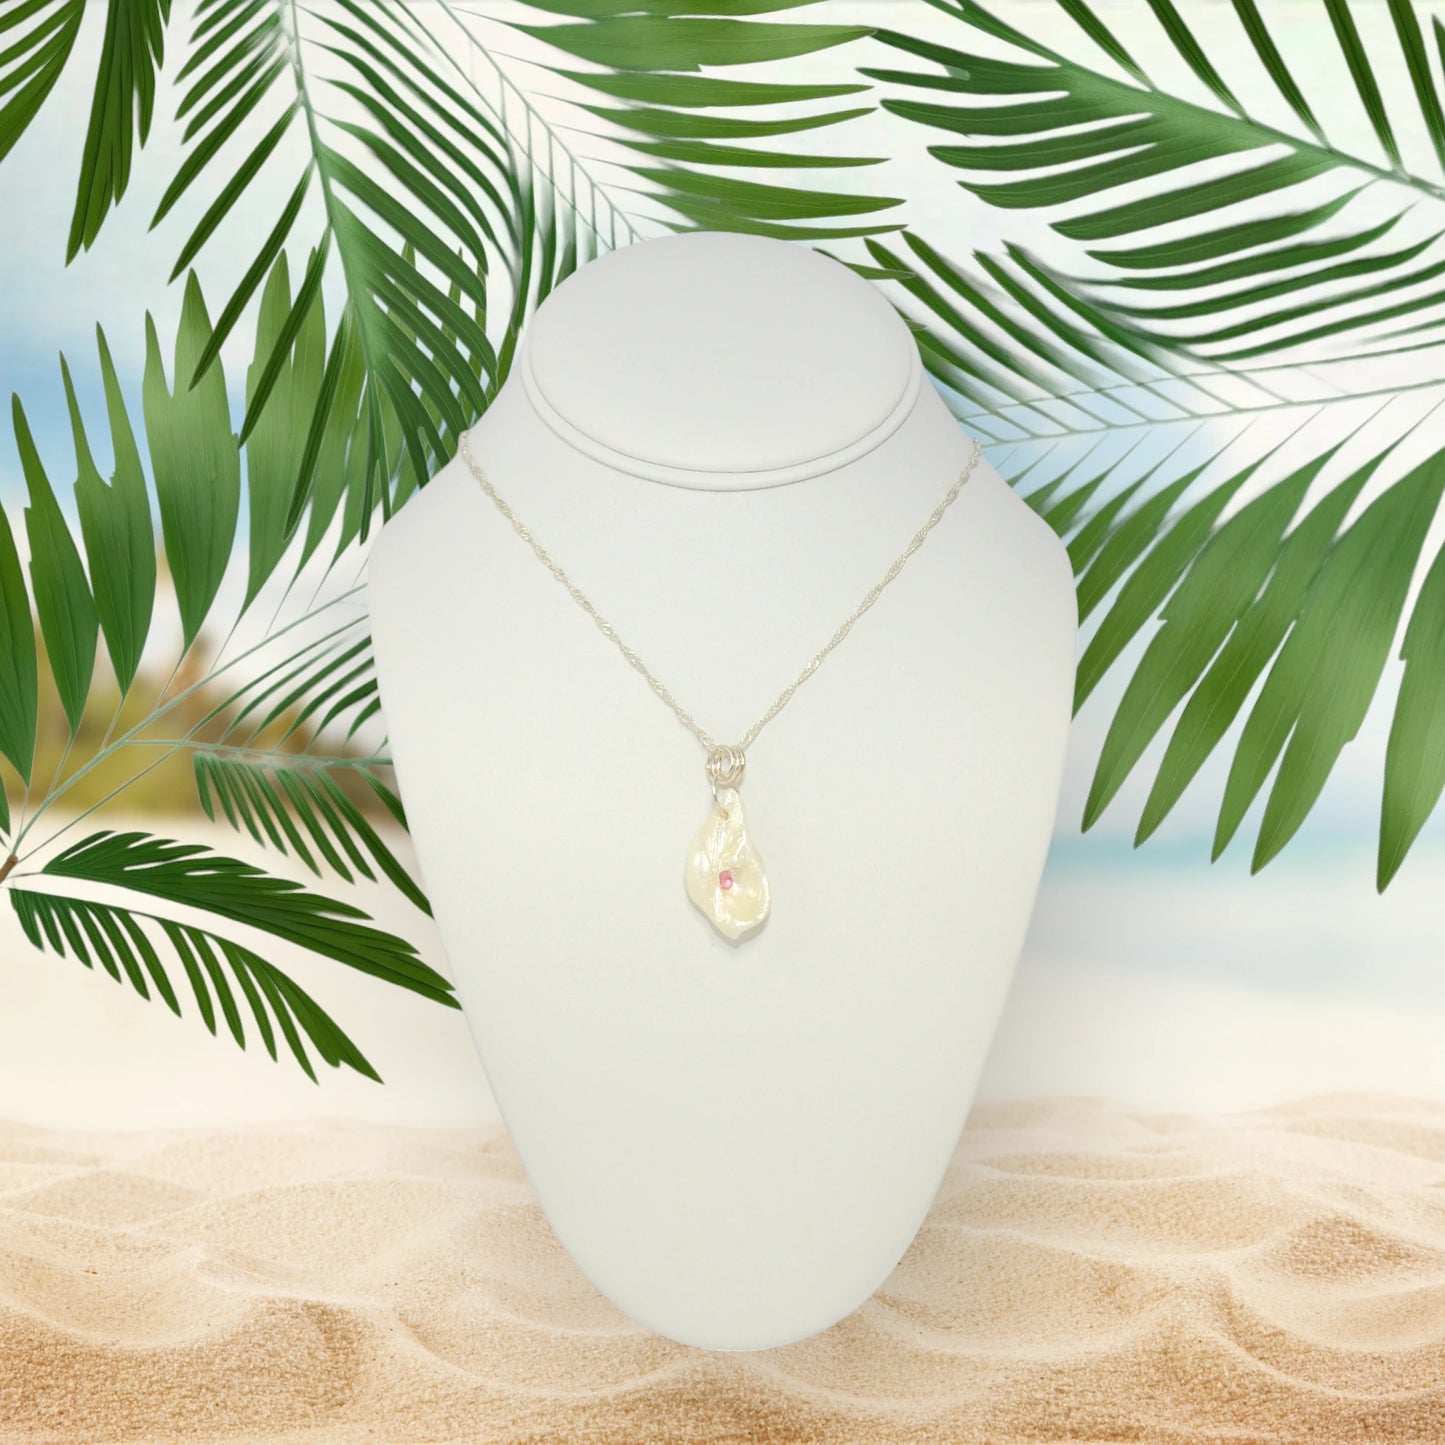 Jewel natural seashell with a real teardrop shaped rose cut pink tourmaline gemstone compliments the pendant. The pendant is shown hanging on a white necklace displayer with a beach background.